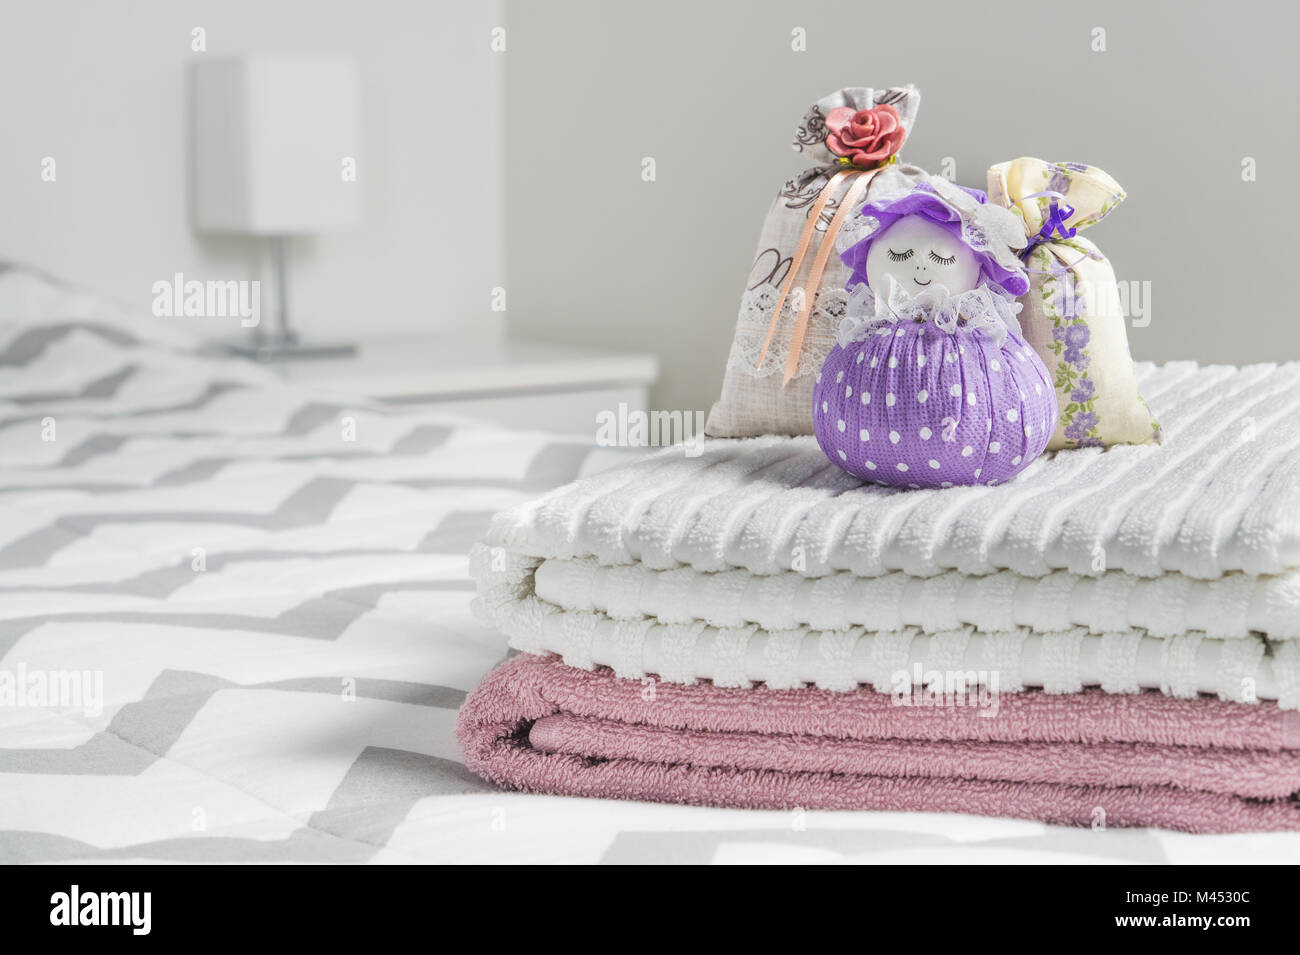 Scented sachets and fragrant pouch figure of a girl. Bags filled with lavender in bedroom. Towels on bed. Decoration accessories and light color. Stock Photo